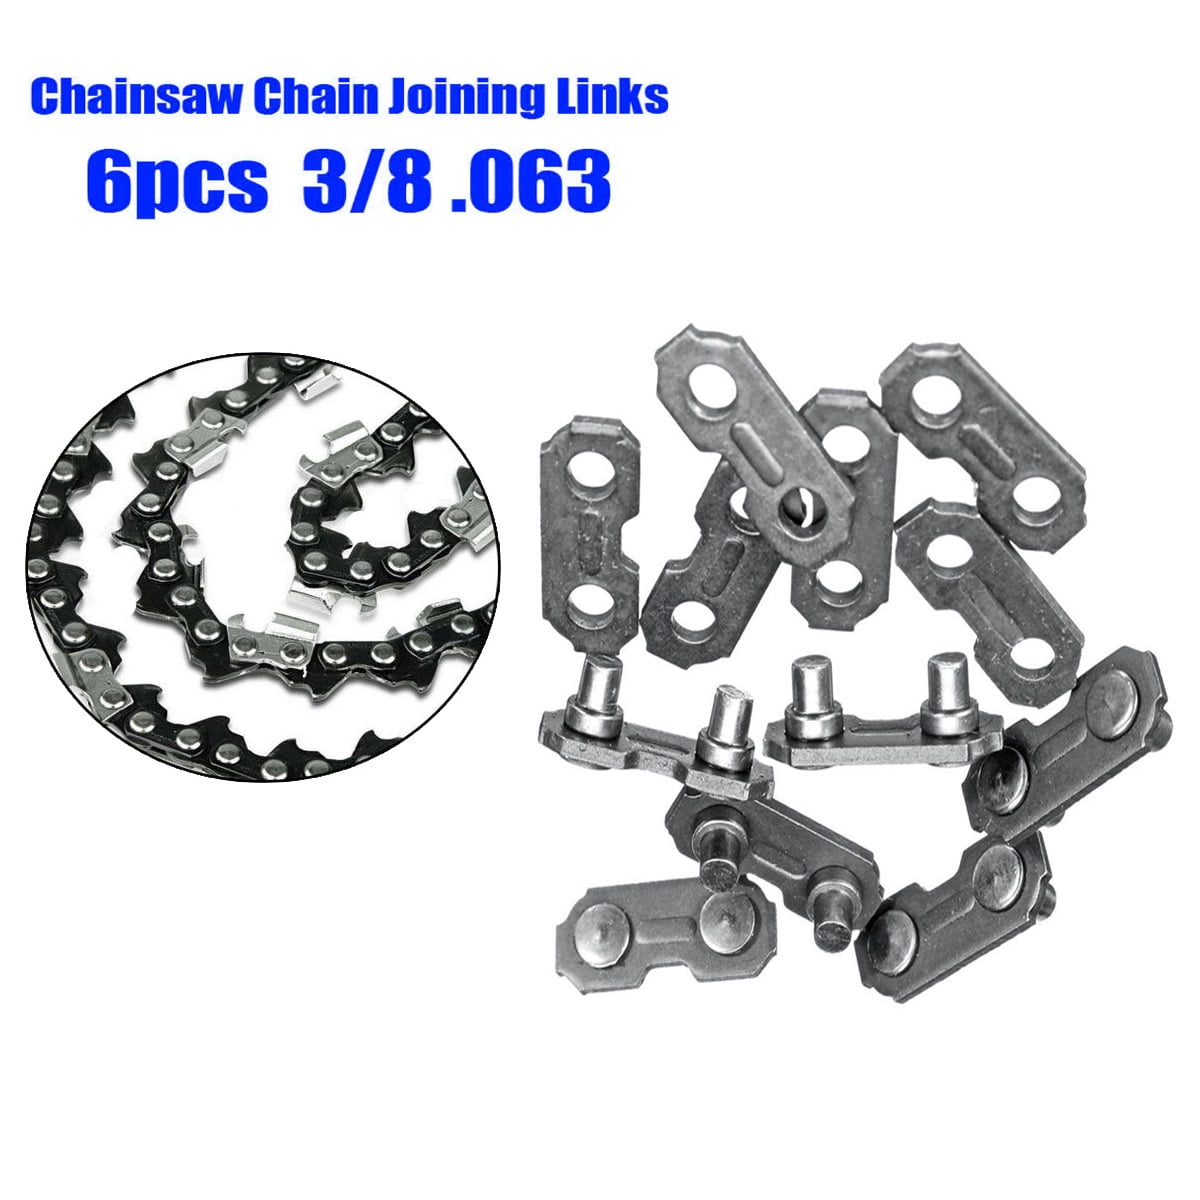 10 Set Chainsaw Chain Joiner Links Parts For JOINING 325 058 CHAINS Accessories 